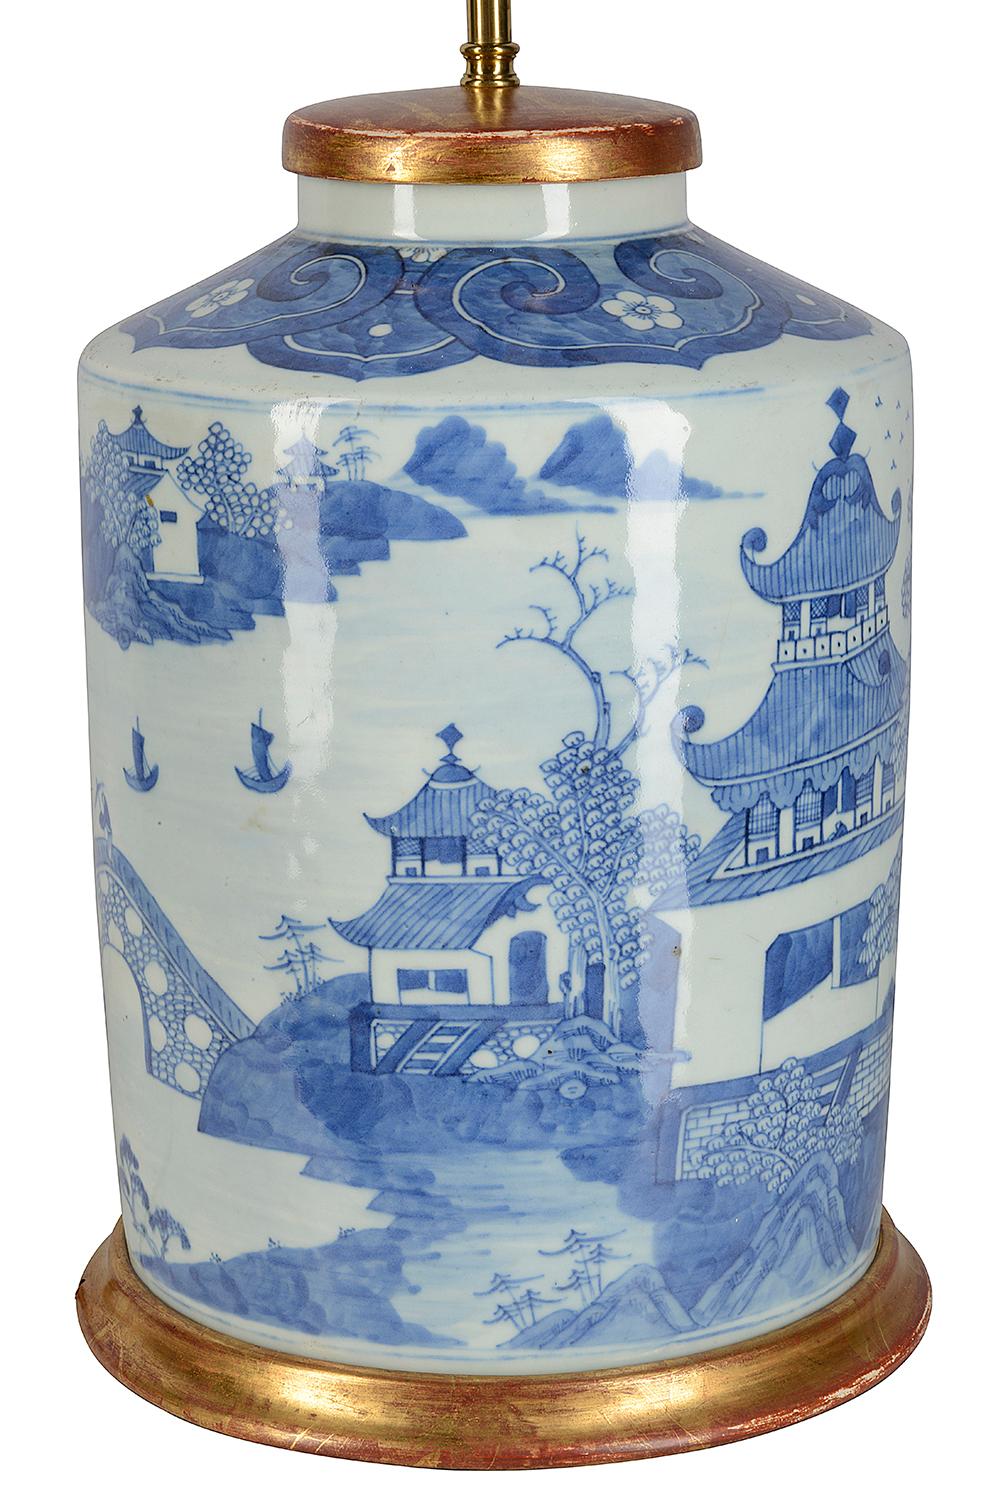 Porcelain Chinese Blue and White Circular Jar / Lamp, Late 19th Century